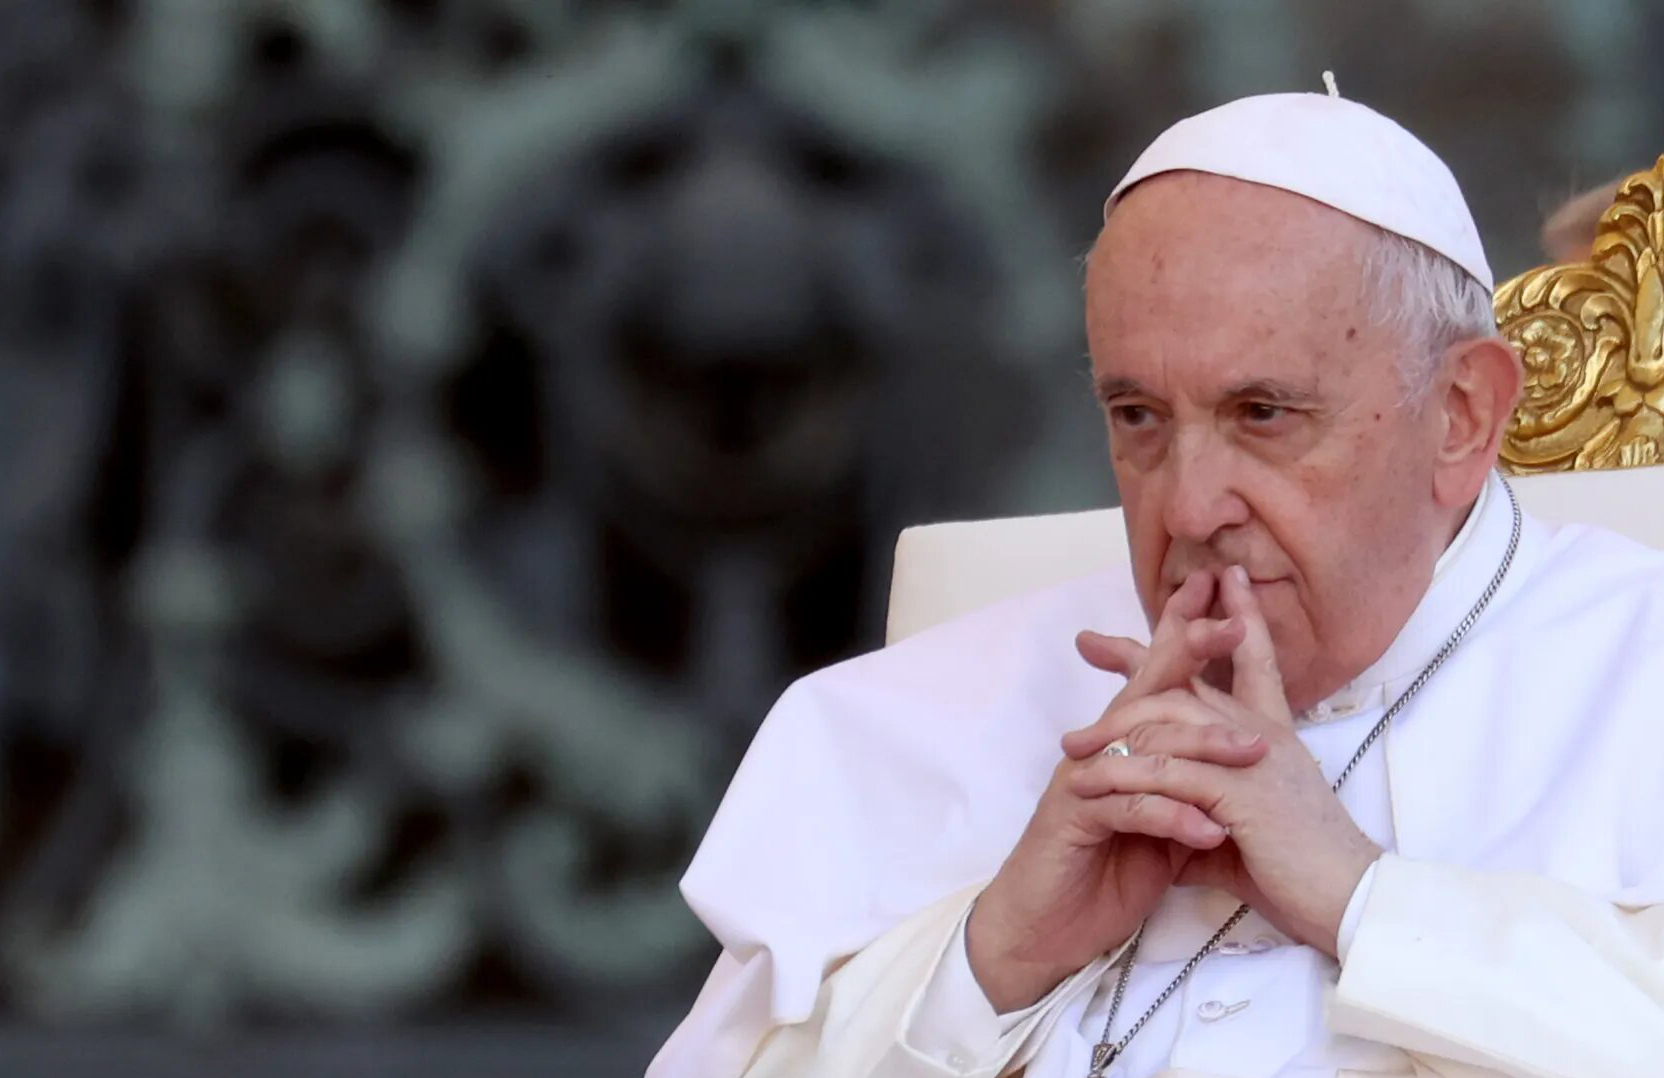 "The world is falling apart": Pope Francis castigates climate denial